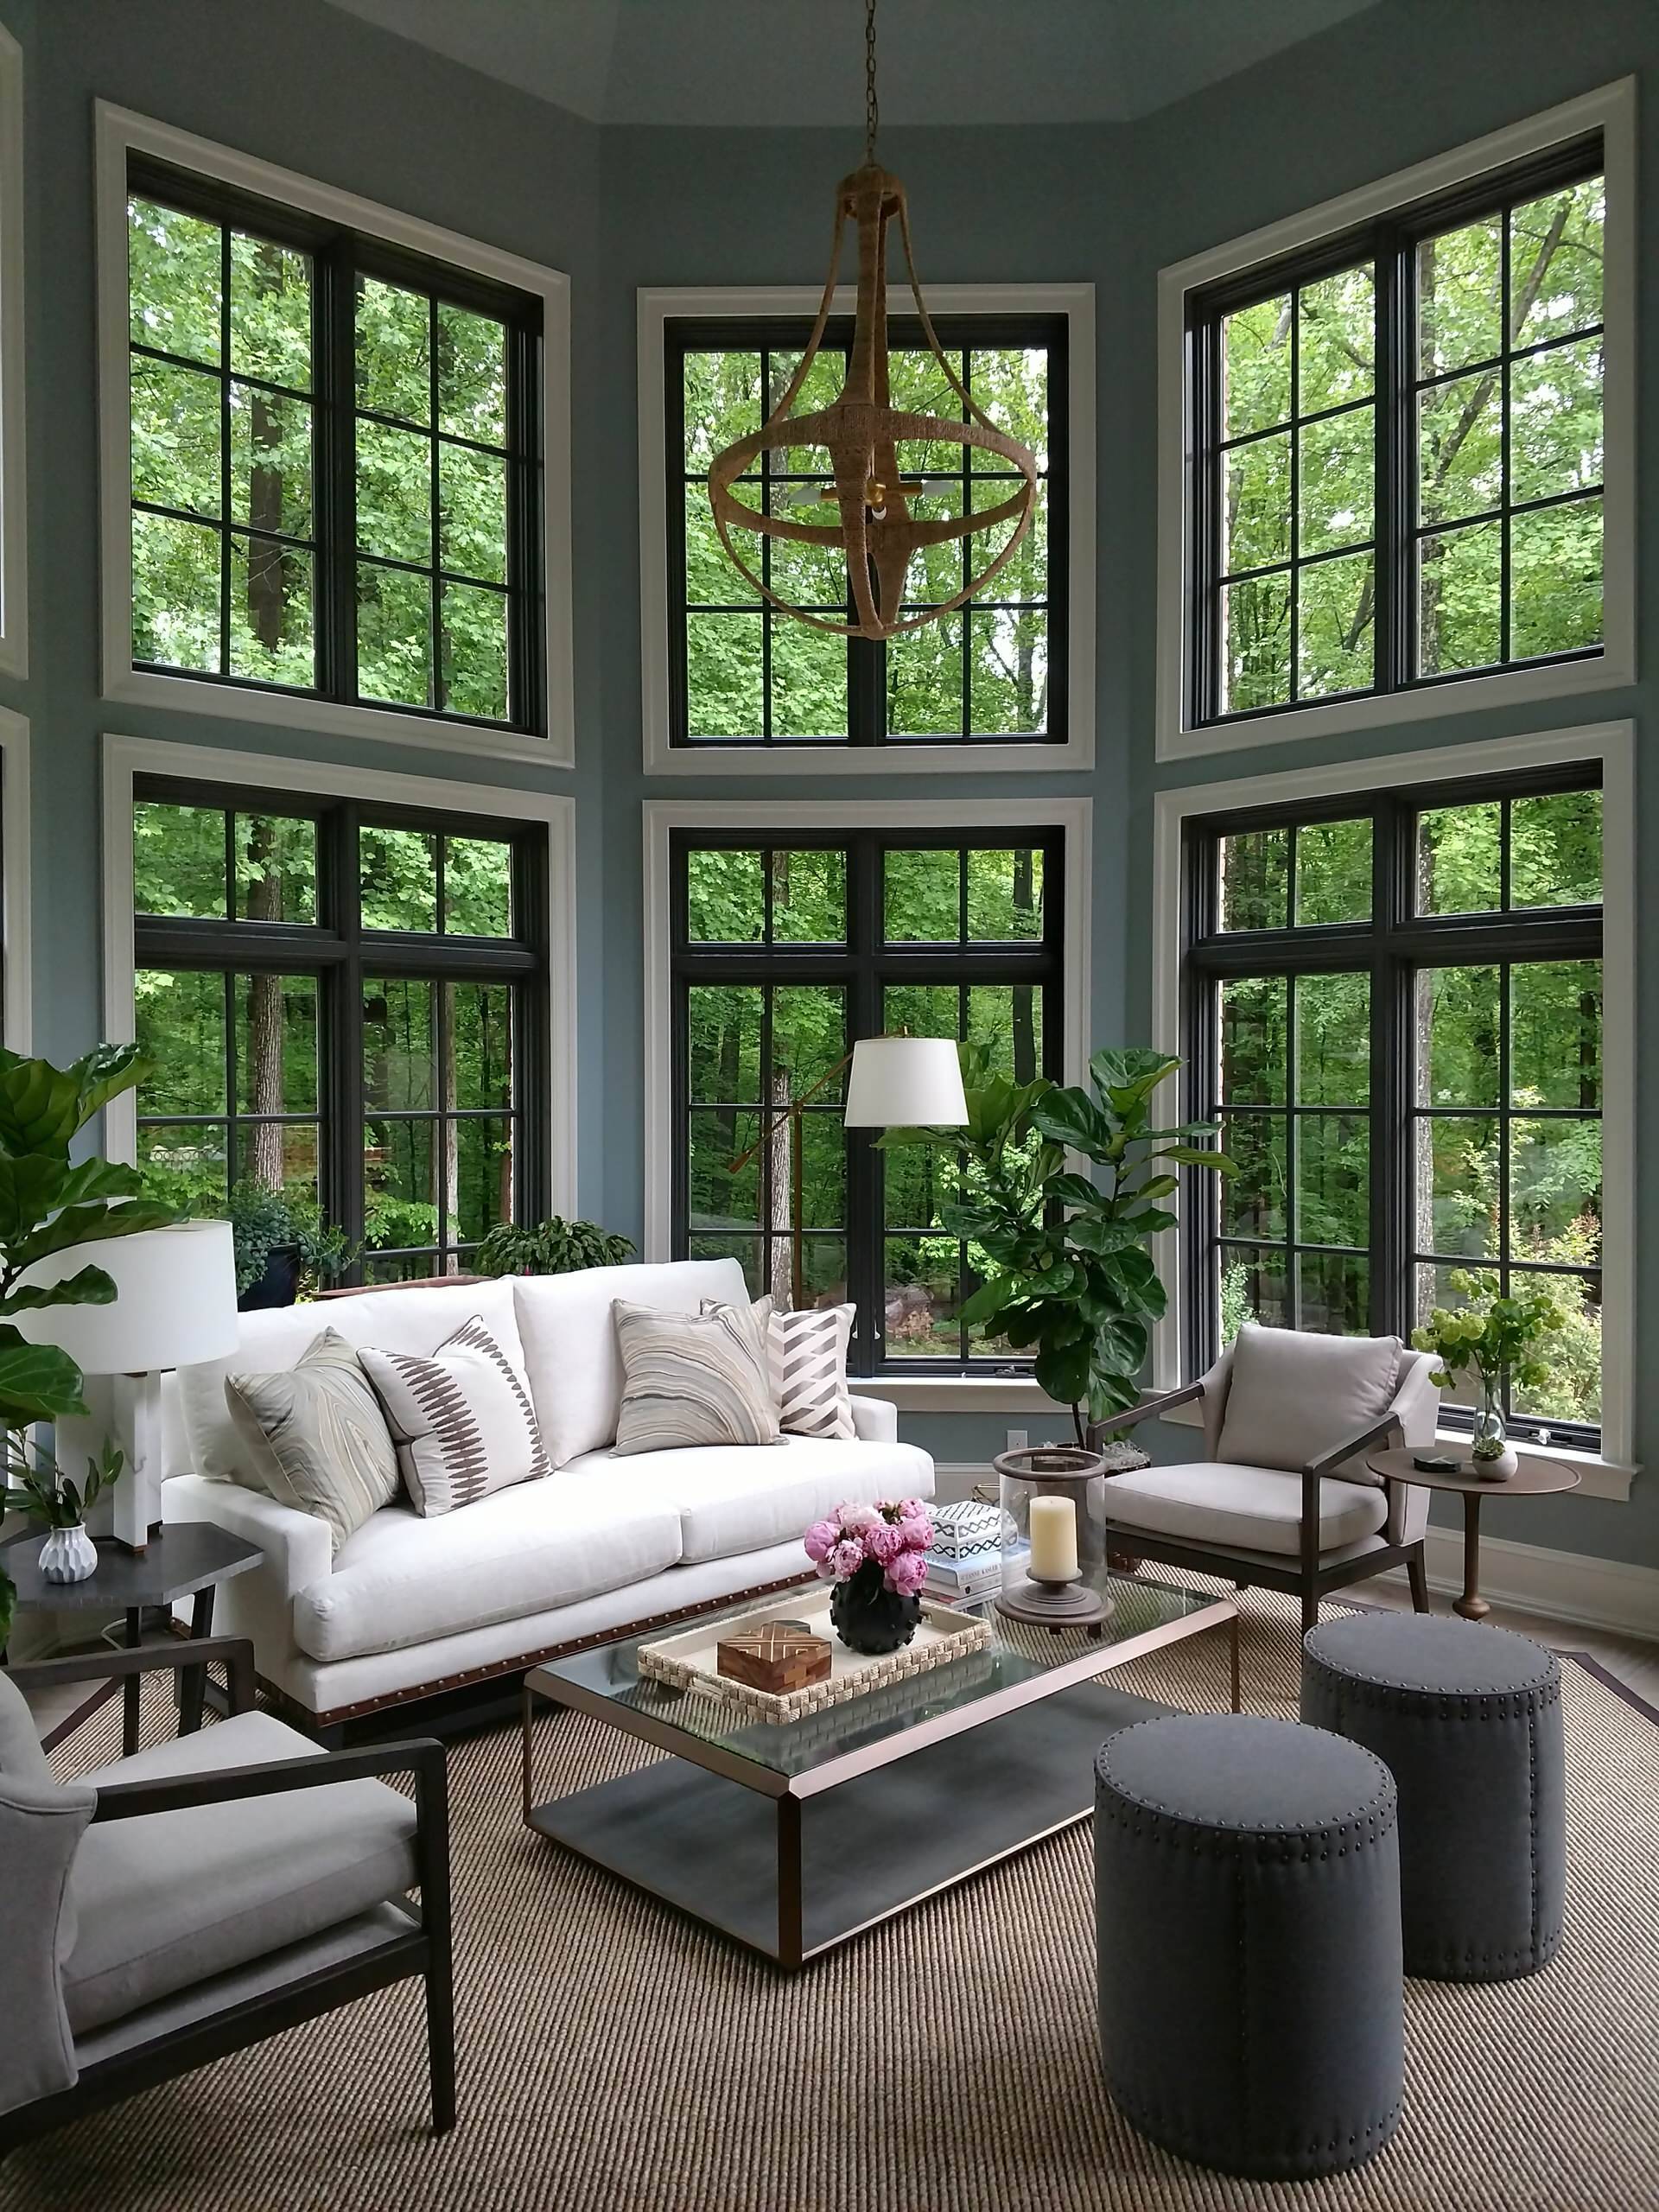 Sophistication and elegance (from Houzz)